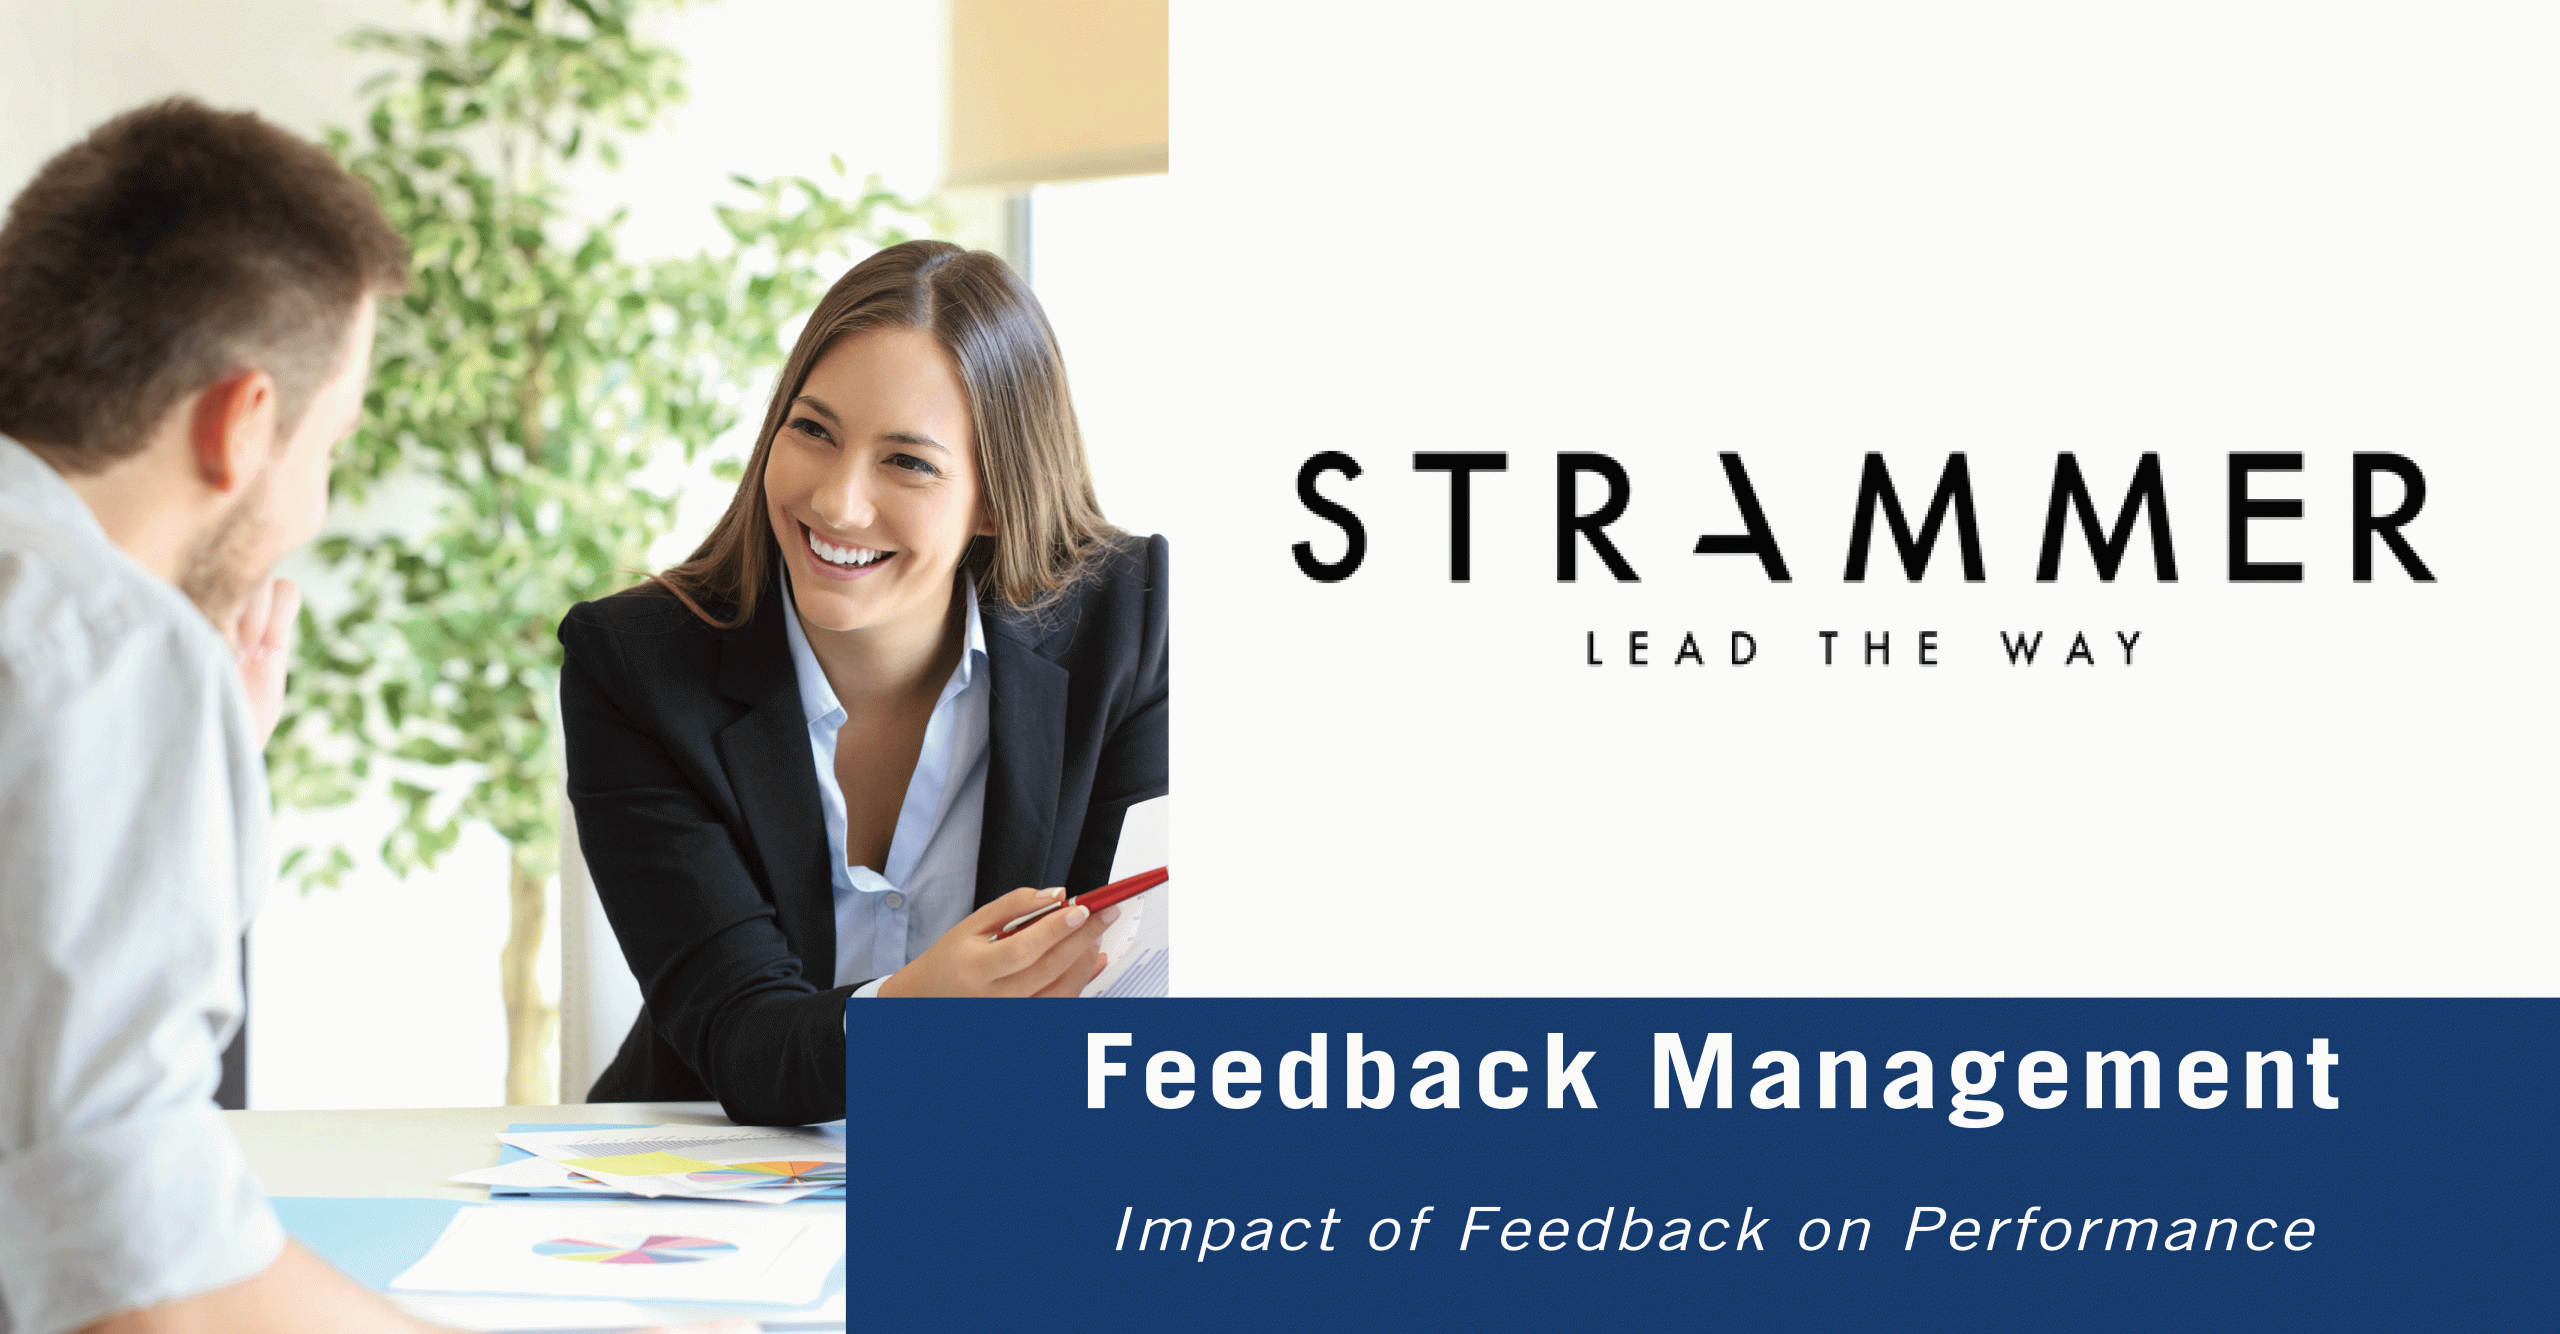 Quality Feedback Can Improve Performance